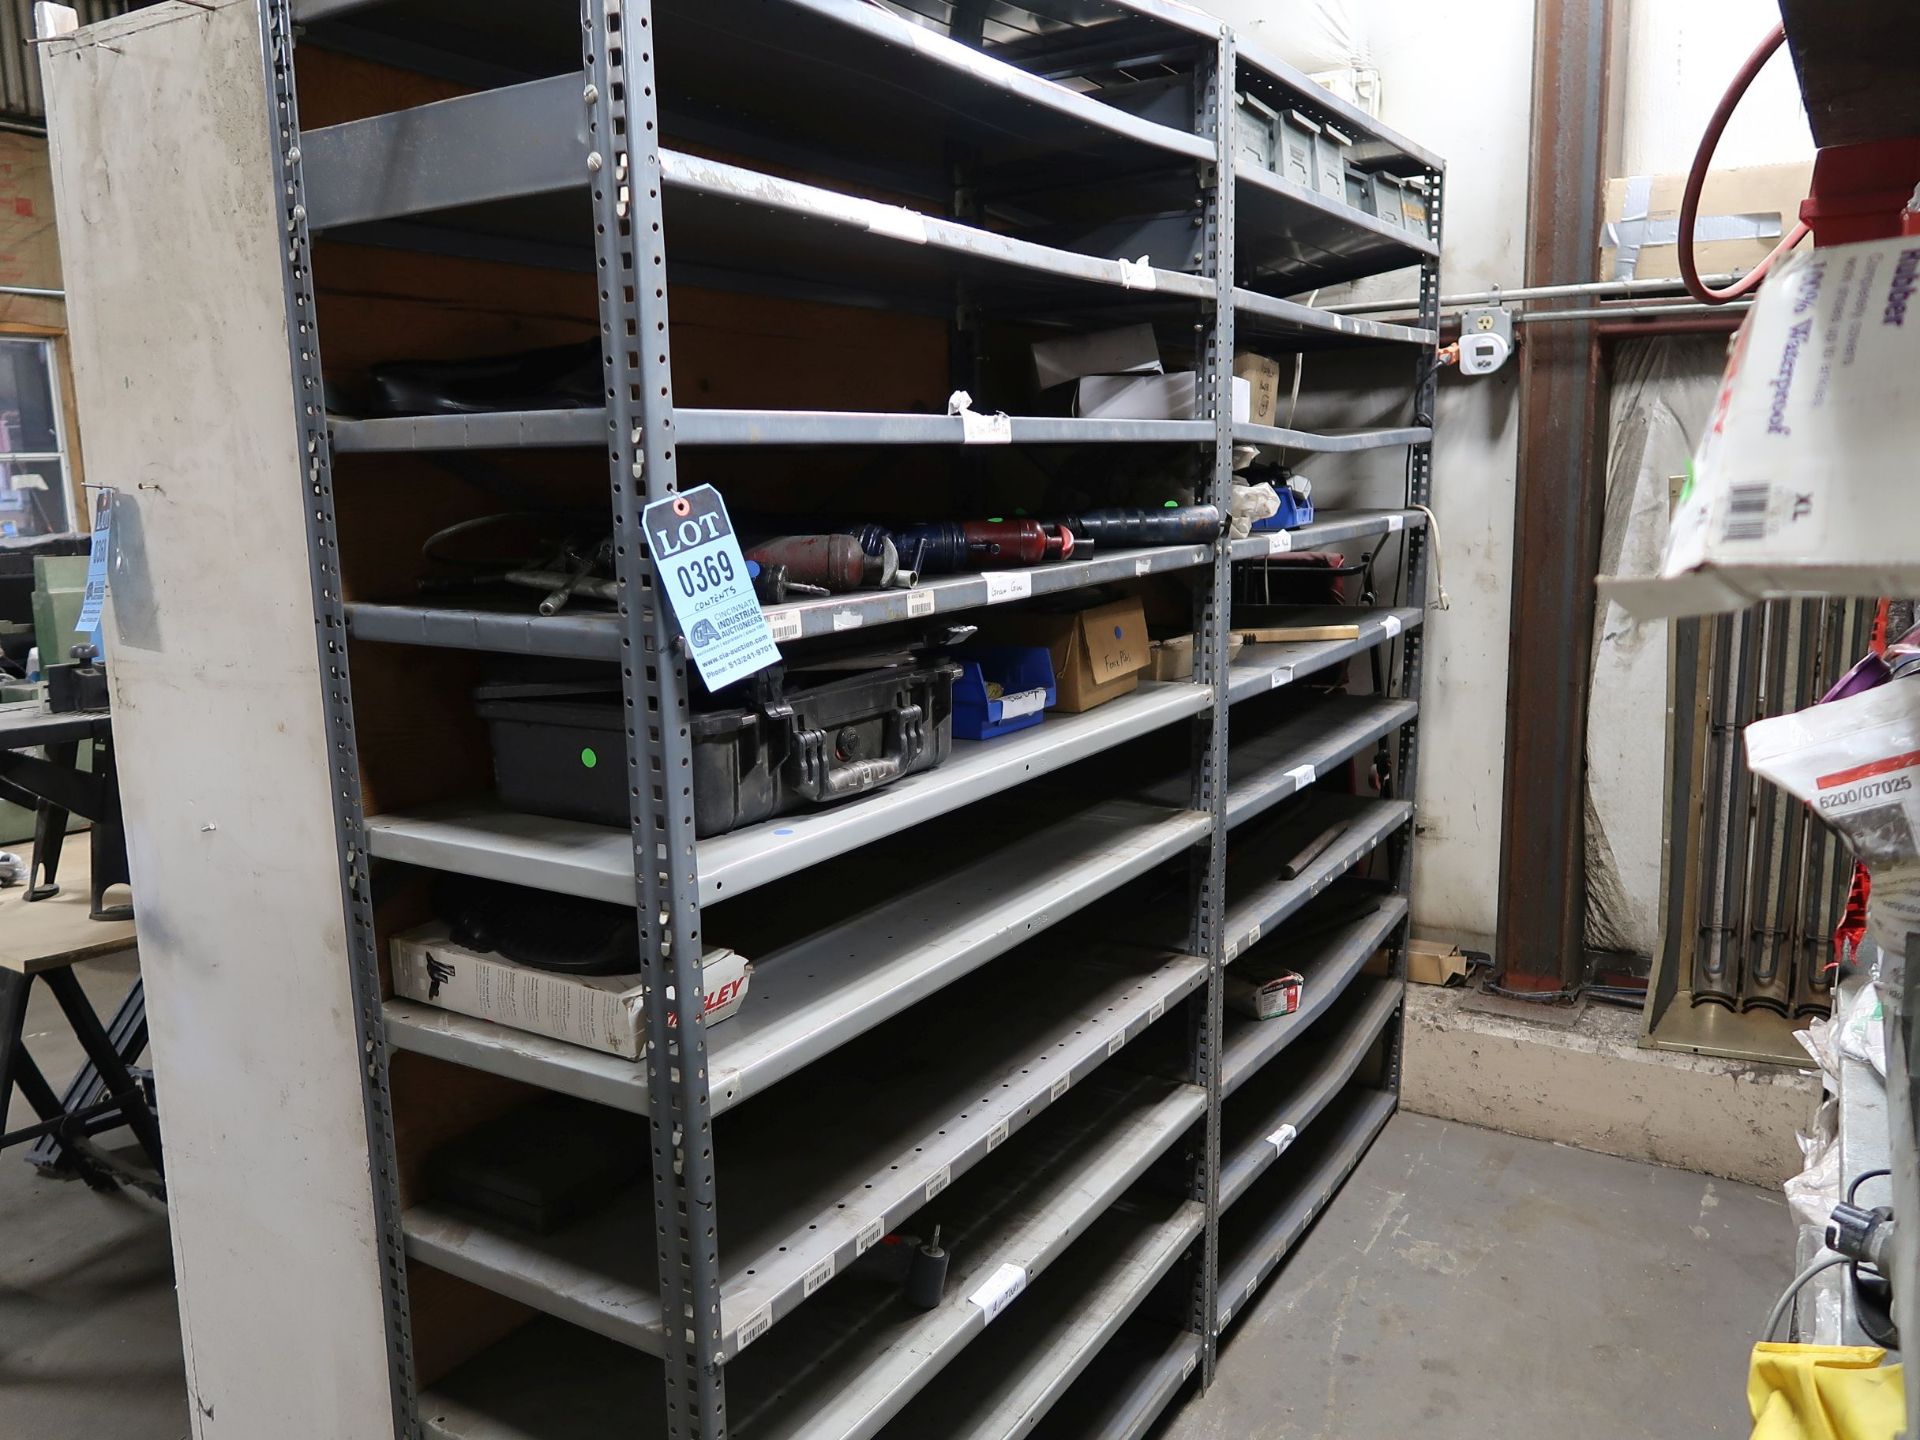 SECTIONS MISCELLANEOUS SIZE STEEL SHELVING **DELAY REMOVAL - PICK UP ON 4-17-2018** - Image 5 of 6